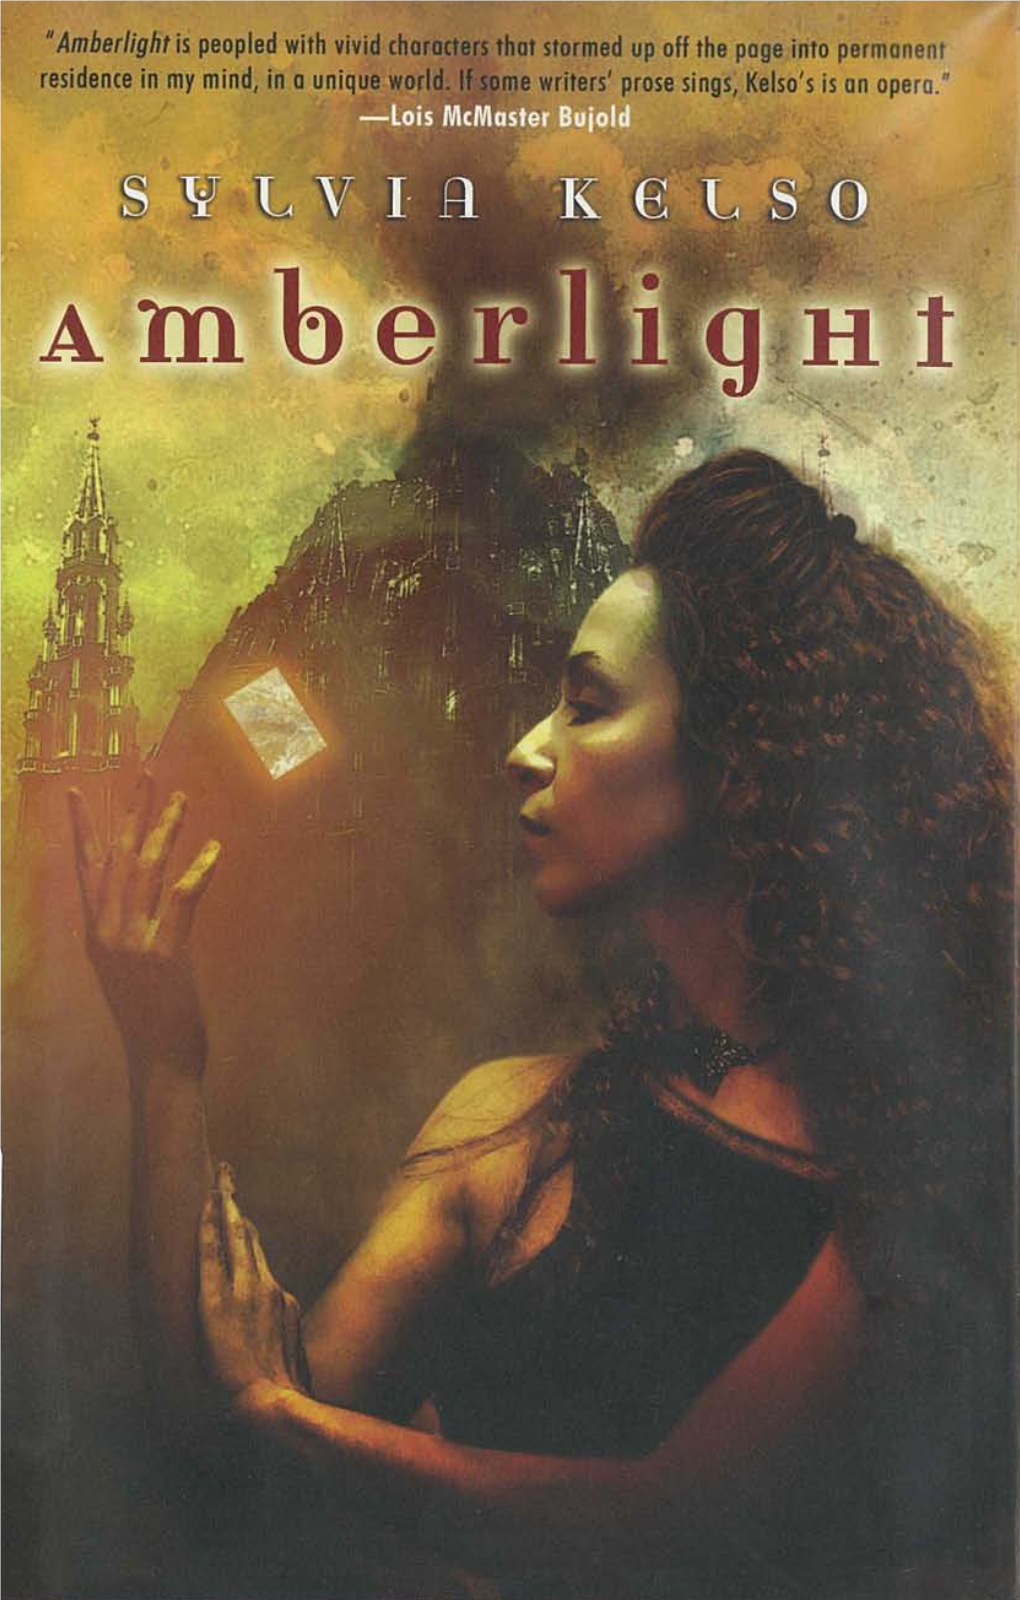 1/ Amberlight Is Peopled with Vivid Chorocters Thot Stormed up Off the Page Into Perman Ent Residence in My Mind, in a Unique World